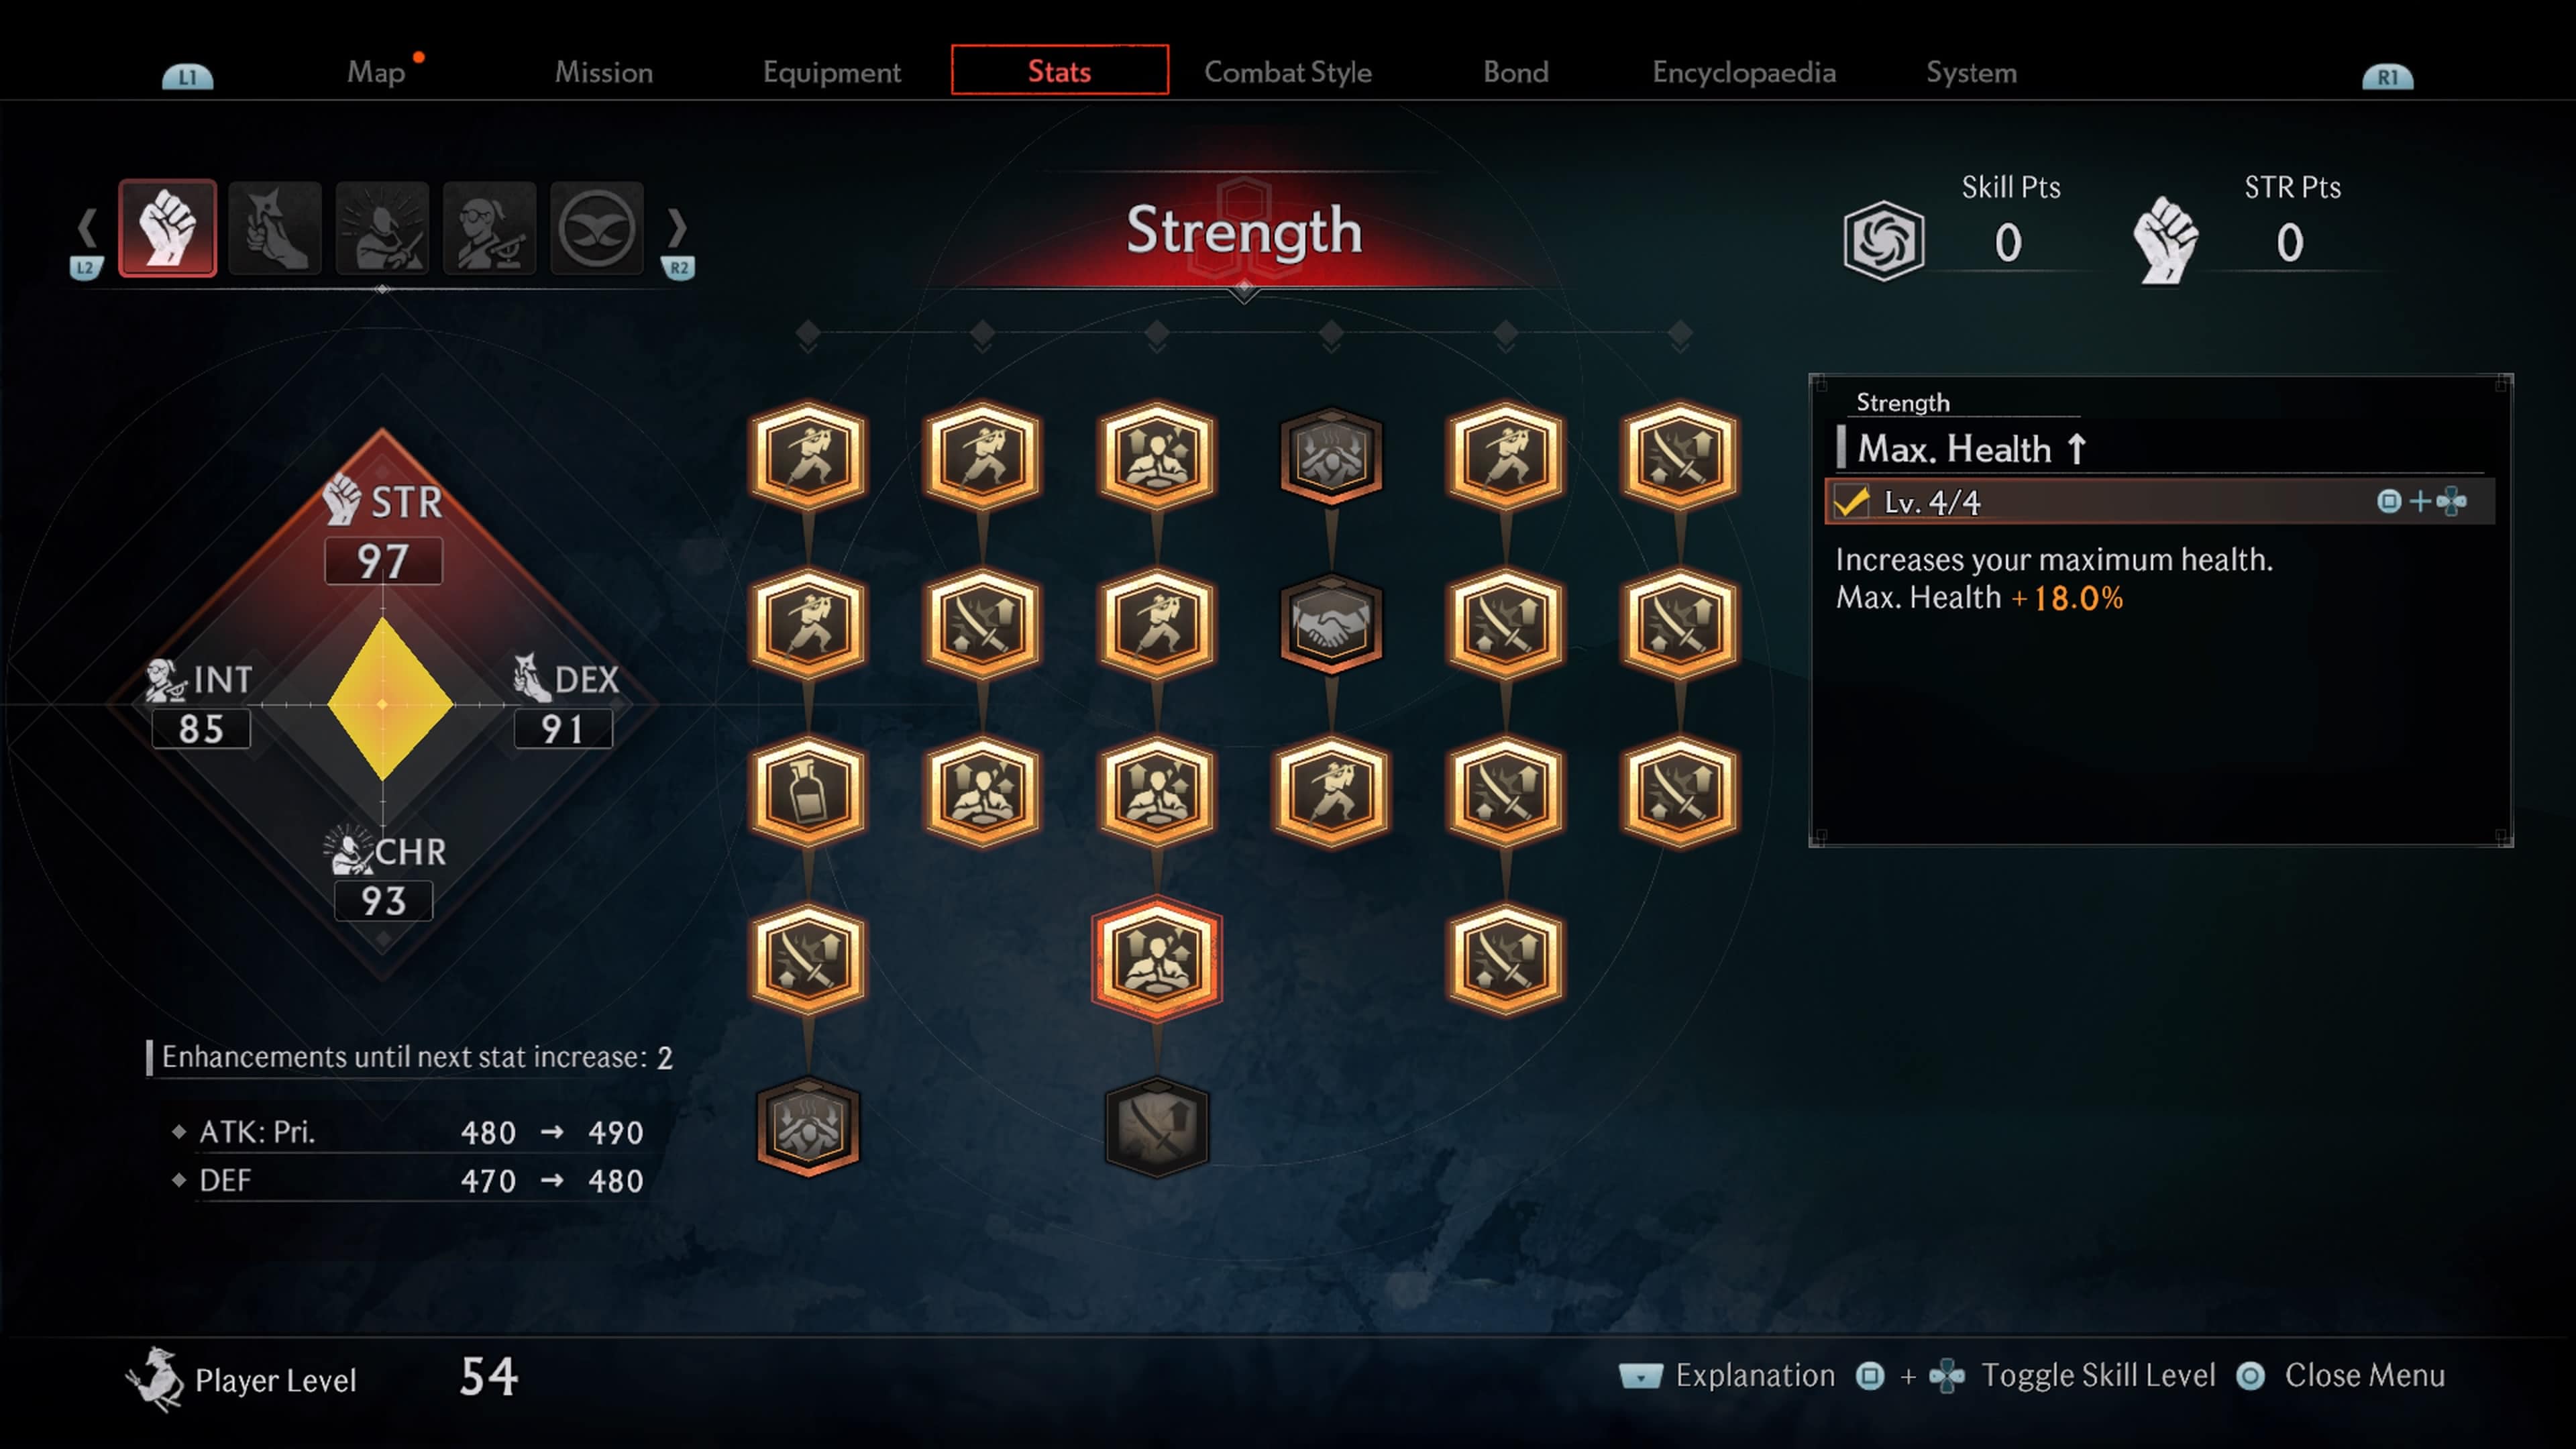 Rise of the Ronin best skills to unlock - the health up skill in the skill tree